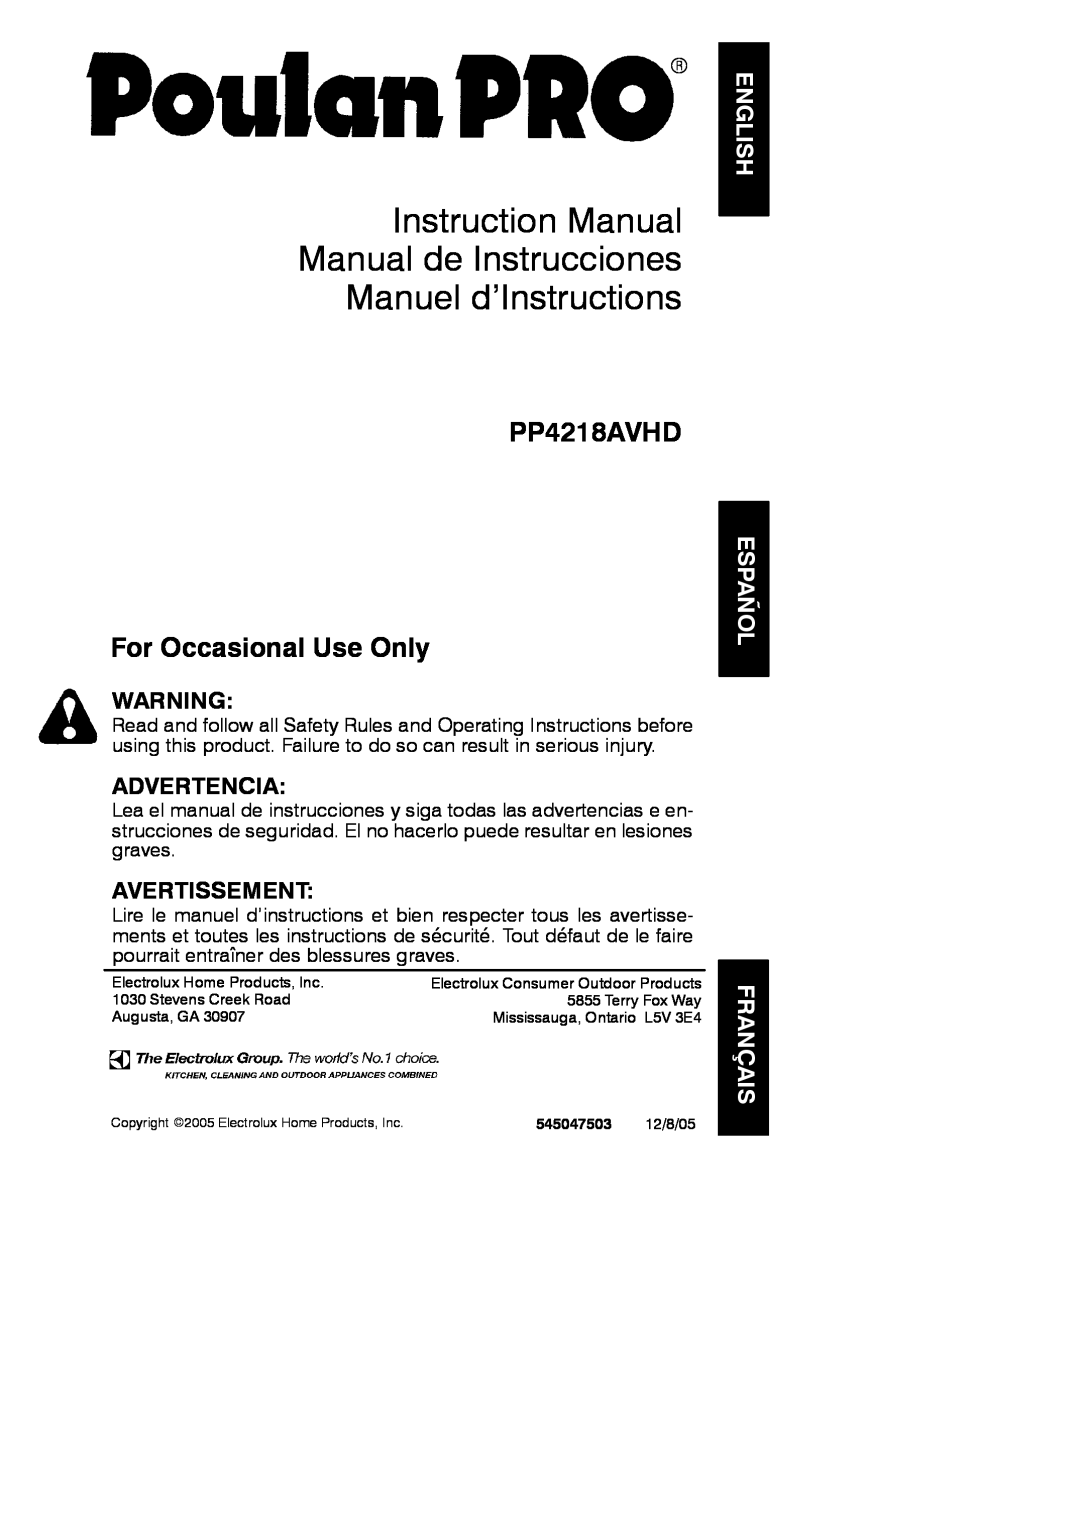 Poulan instruction manual English, Español Français, PP4218AVHD For Occasional Use Only, Advertencia, Avertissement 